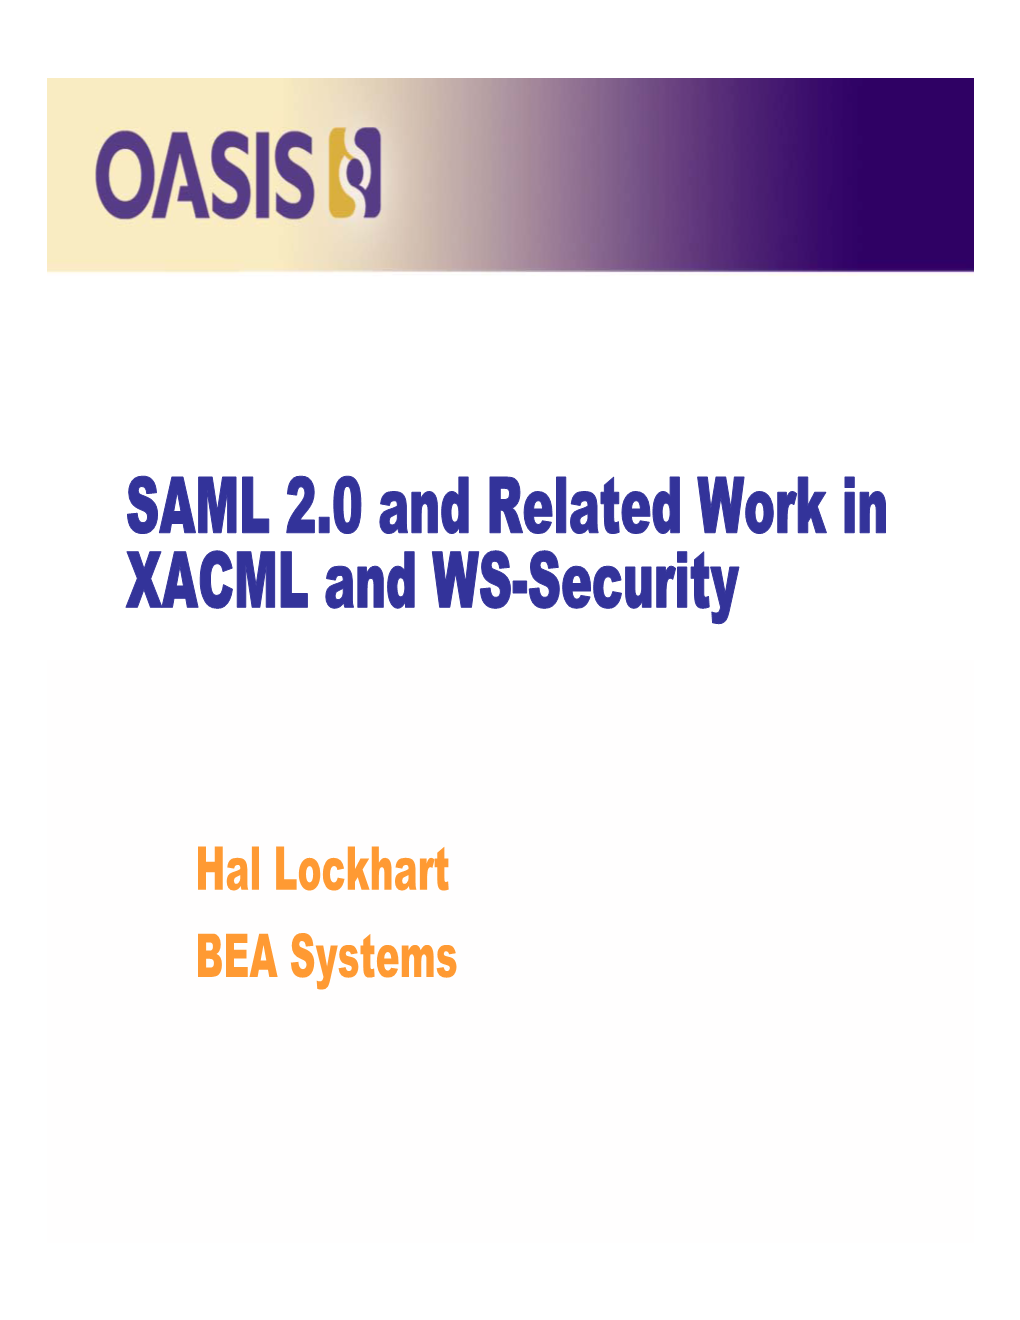 SAML 2.0 and Related Work in XACML and WS-Security